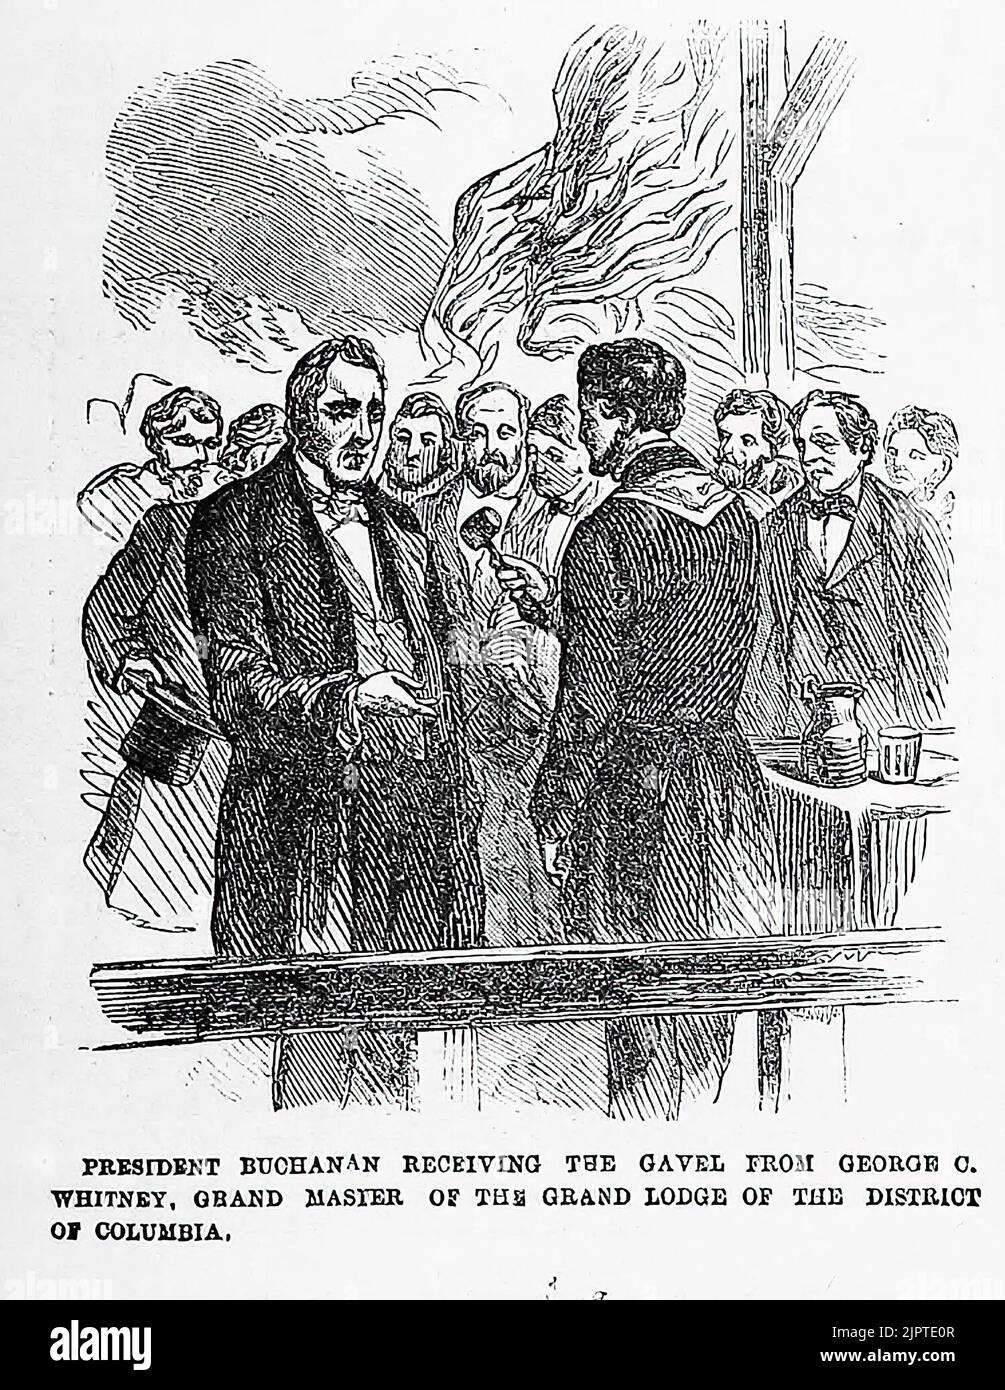 Inauguration of Clark Mills' statue of George Washington - President James Buchanan receiving the gavel from George C. Whitney, Grand Master of the Masonic Grand Lodge of the District of Columbia. February 22nd, 1860. 19th century illustration from Frank Leslie's Illustrated Newspaper Stock Photo